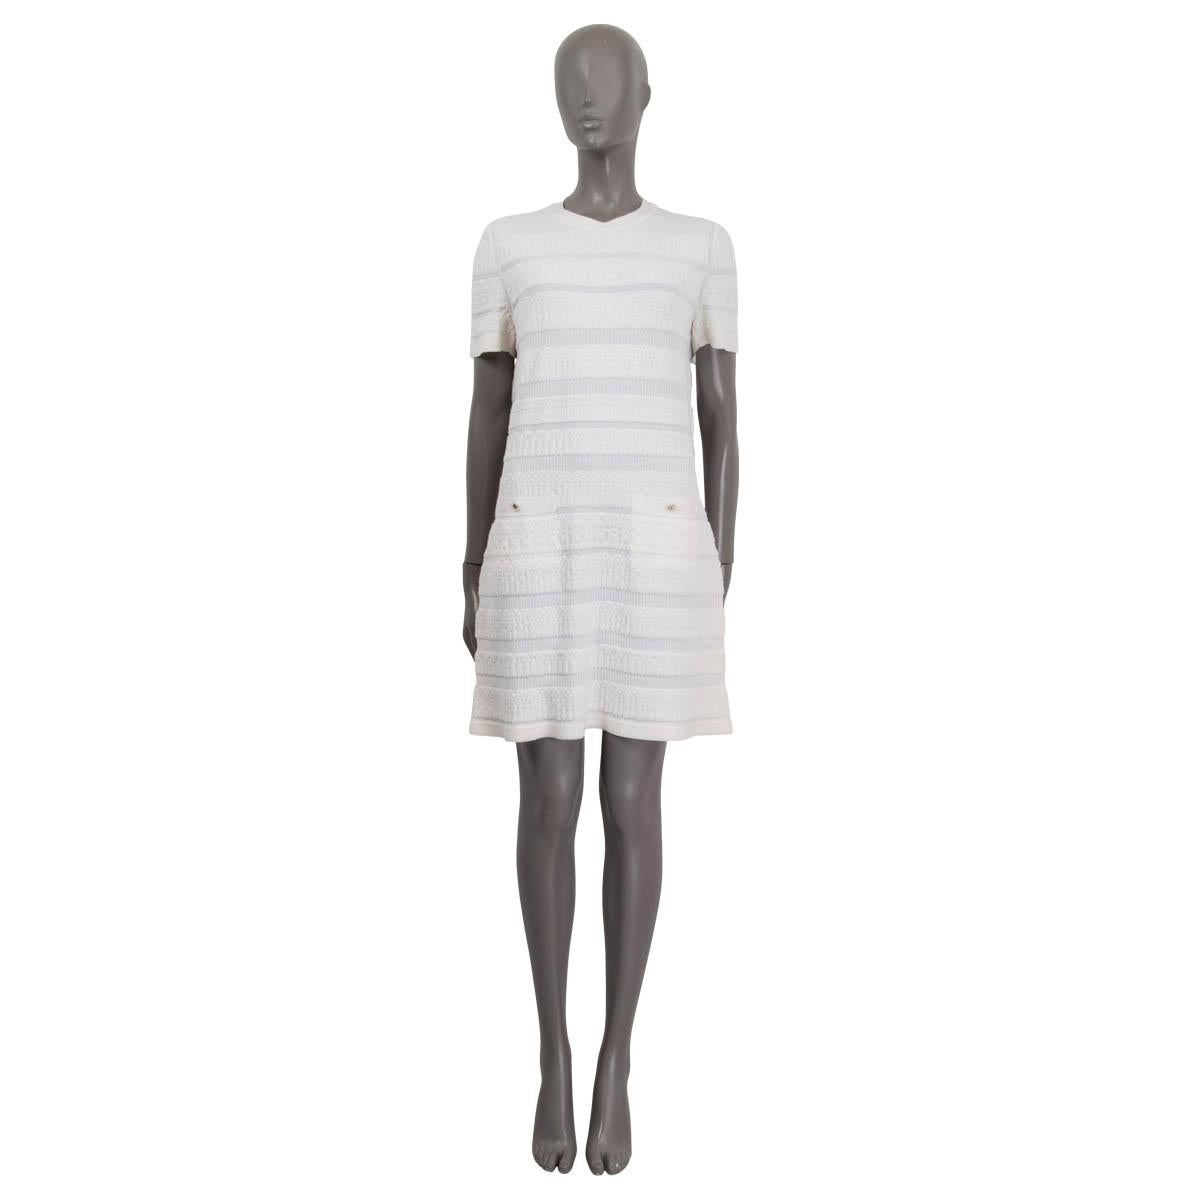 100% authentic Chanel 2019 short sleeve knit dress in ivory wool (96%) and polyamide (4%). Features two sewn shut 'CC' buttoned pockets on the front. Opens with five 'CC' buttons on the back. Unlined. Has been worn and is in excellent